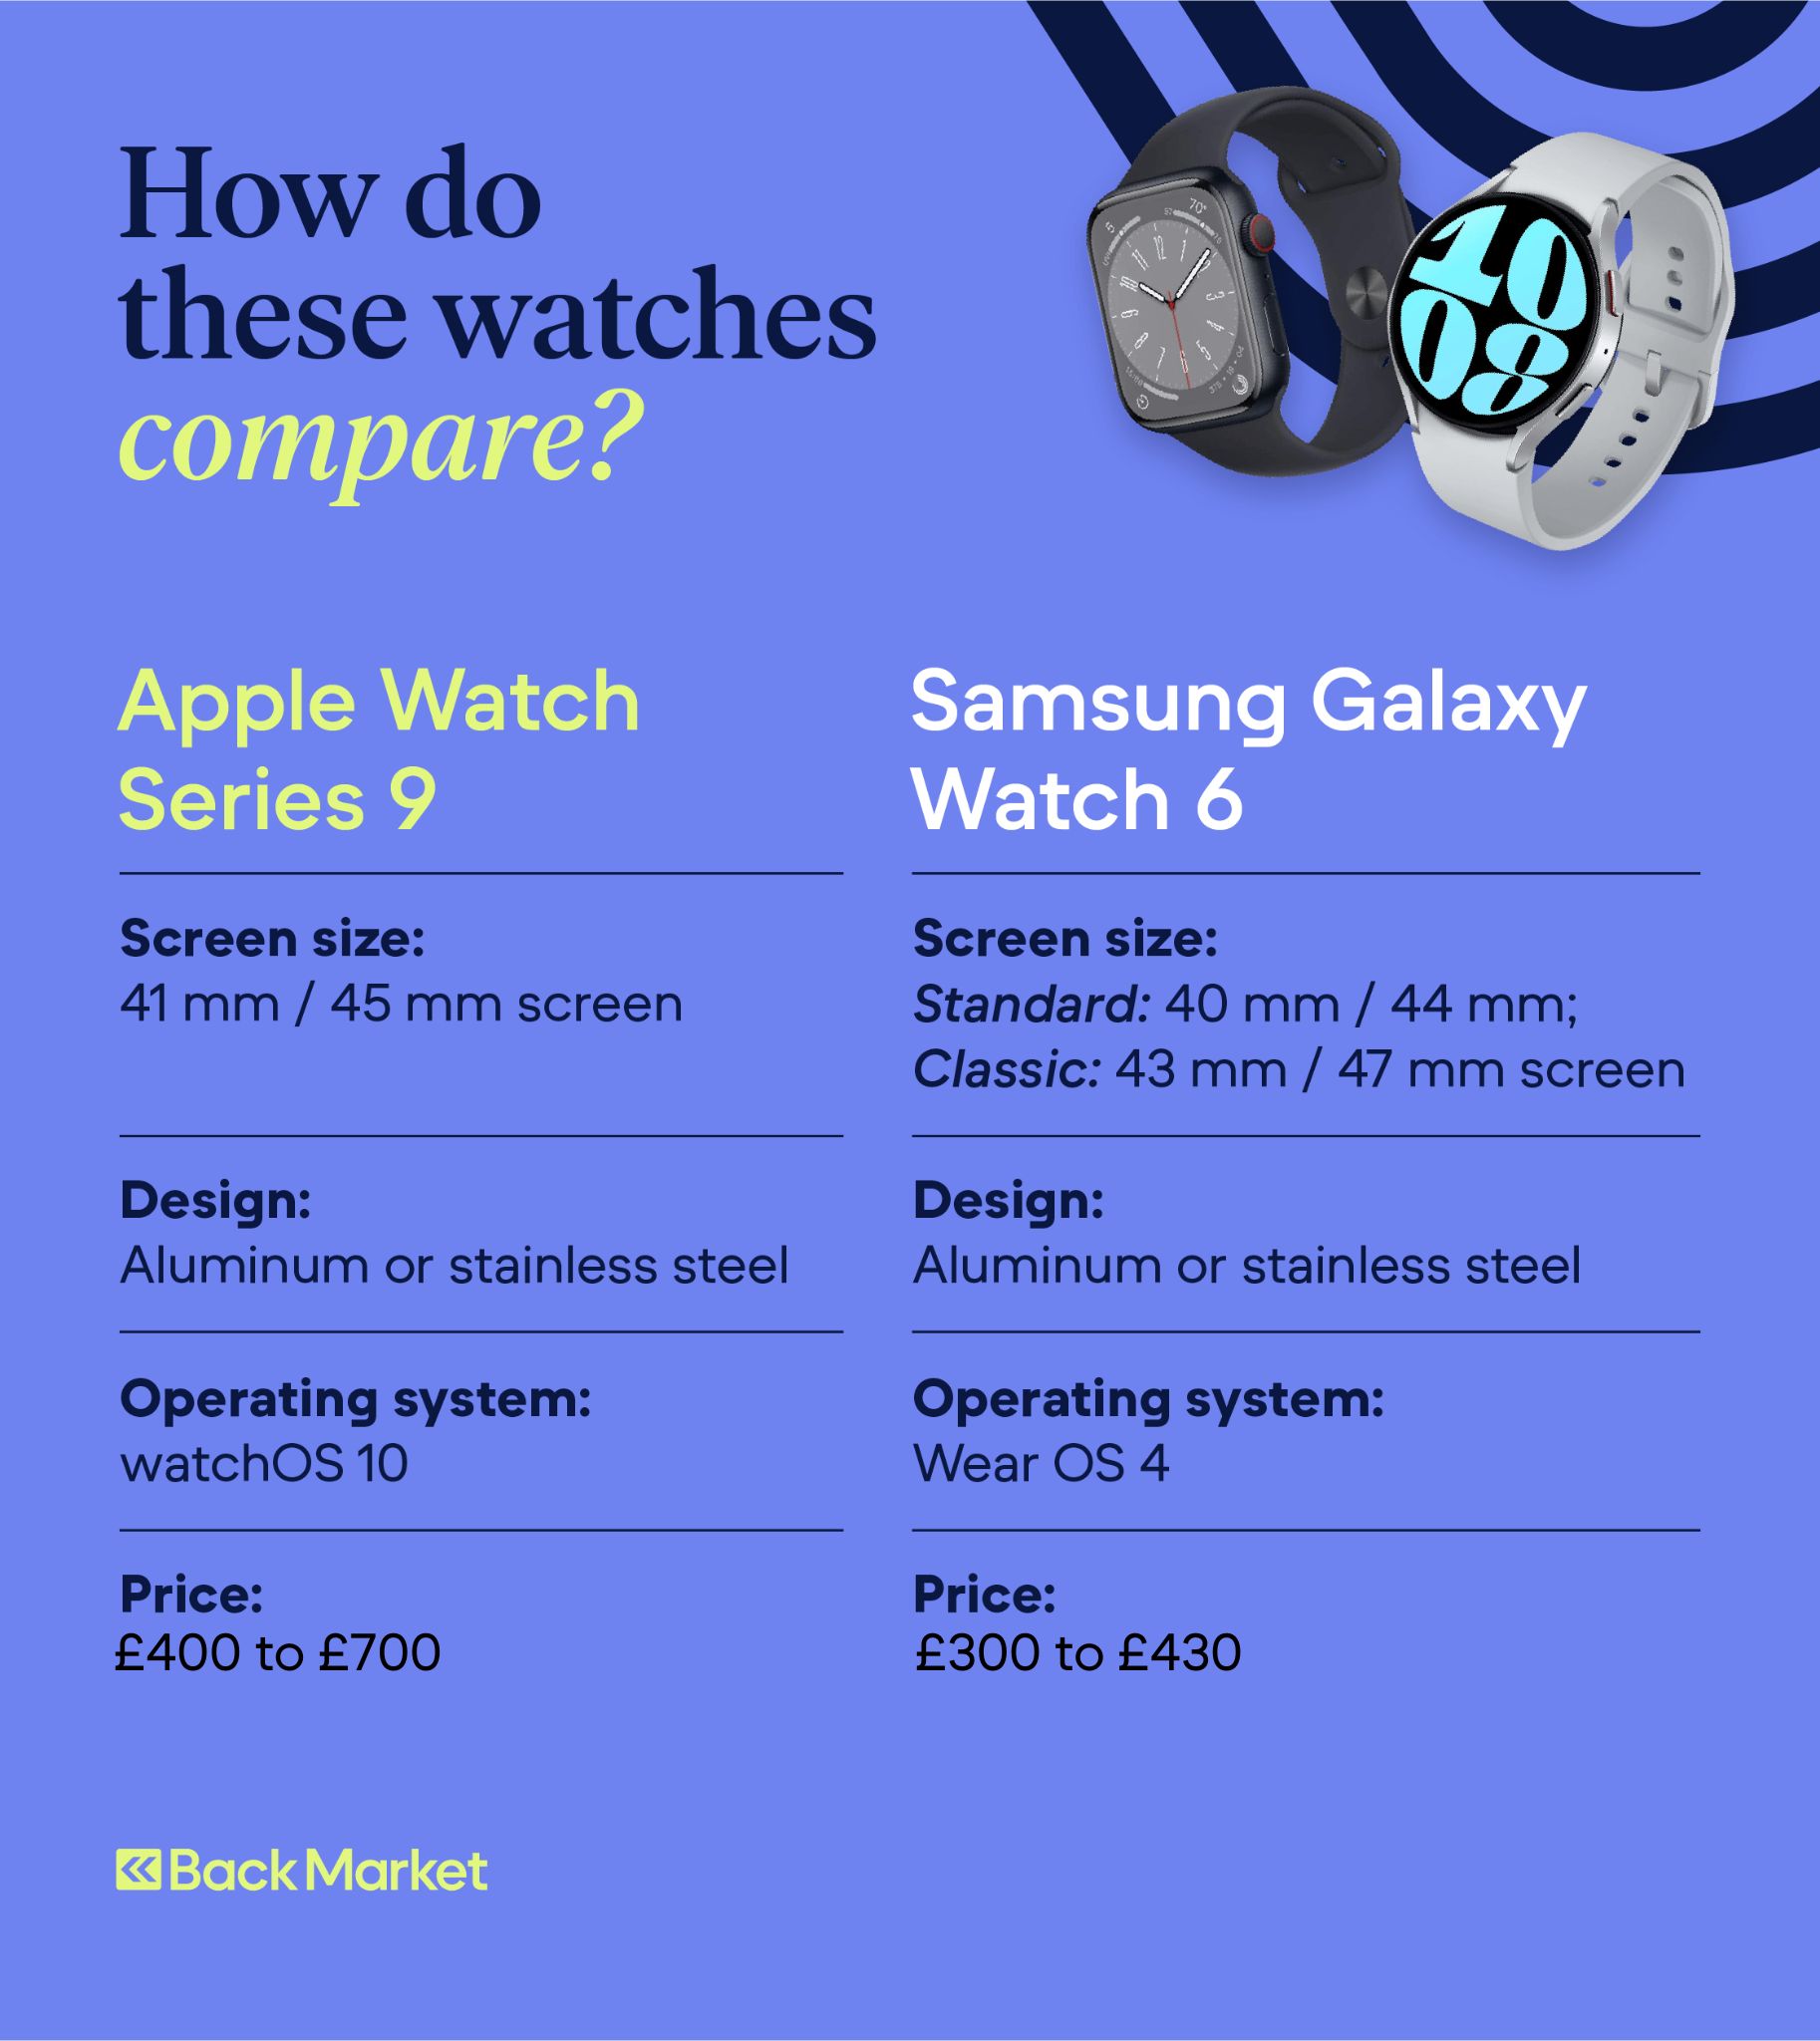 A graphic highlighting how the Apple Watch Series 9 and Samsung Galaxy Watch 6 compare.